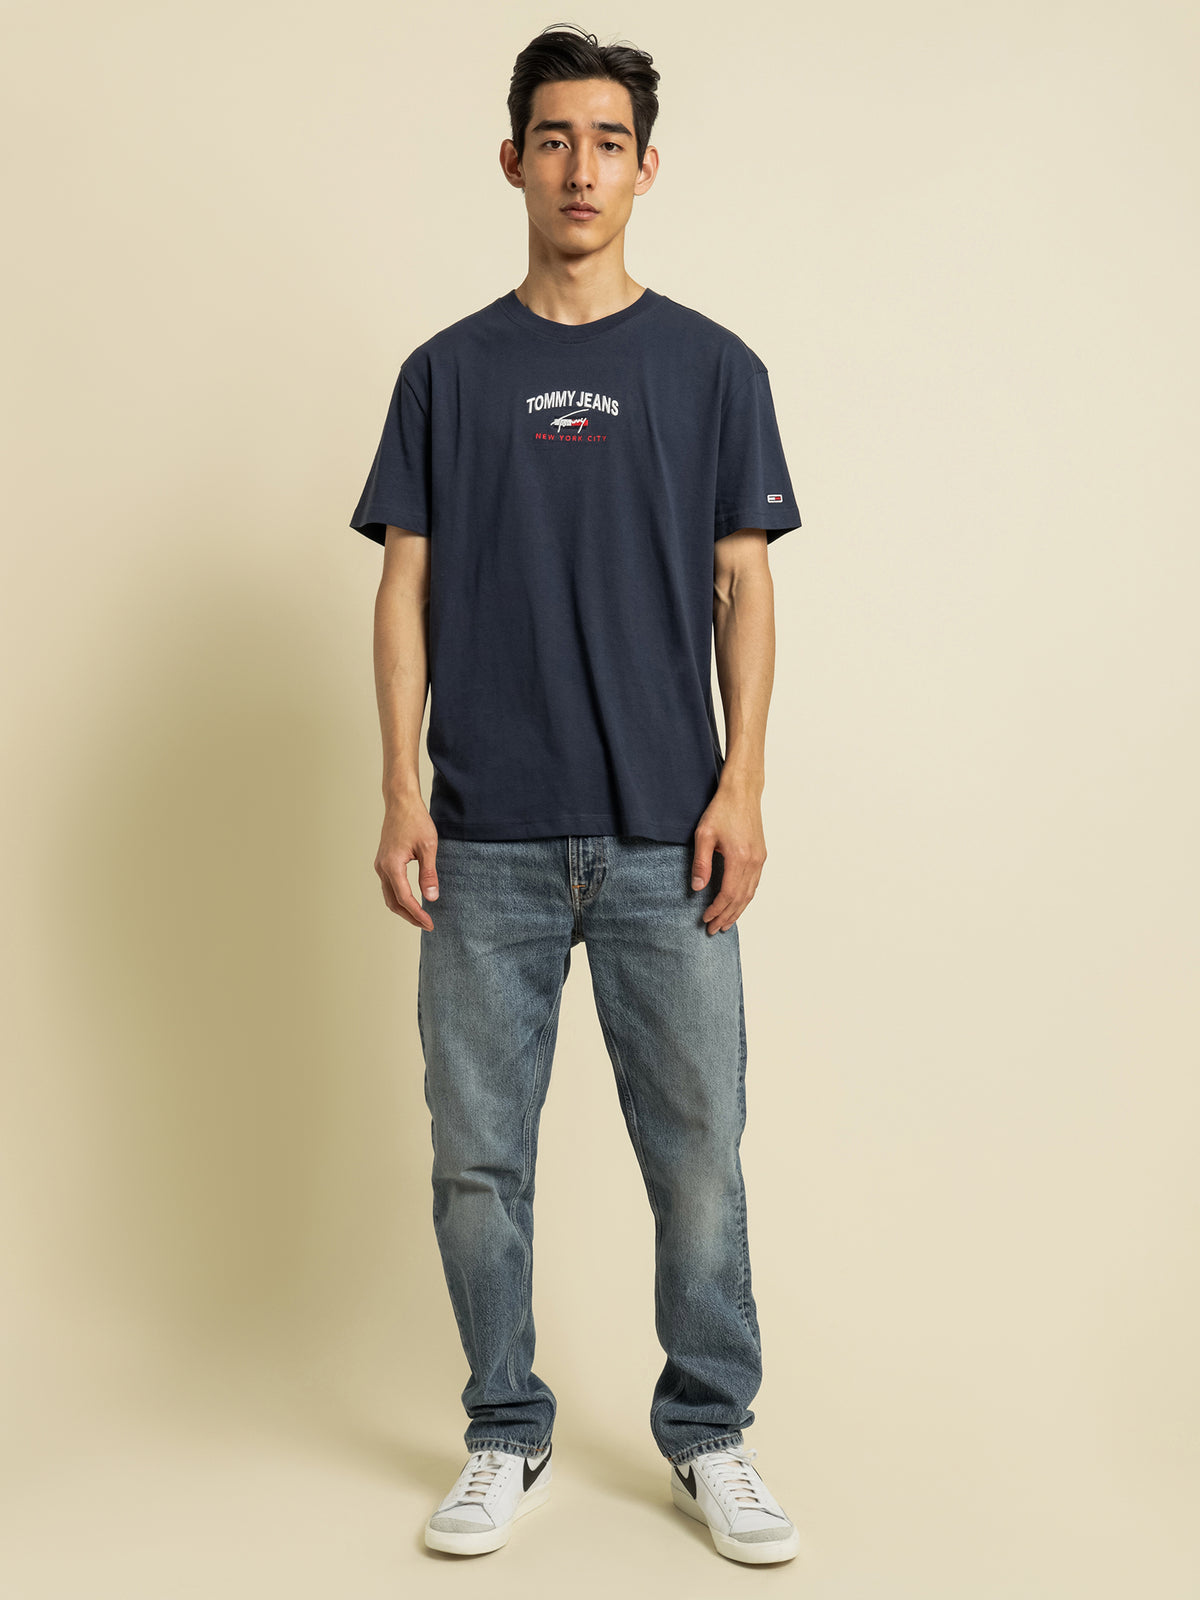 Timeless Tommy Script T-Shirt in Twilight Navy